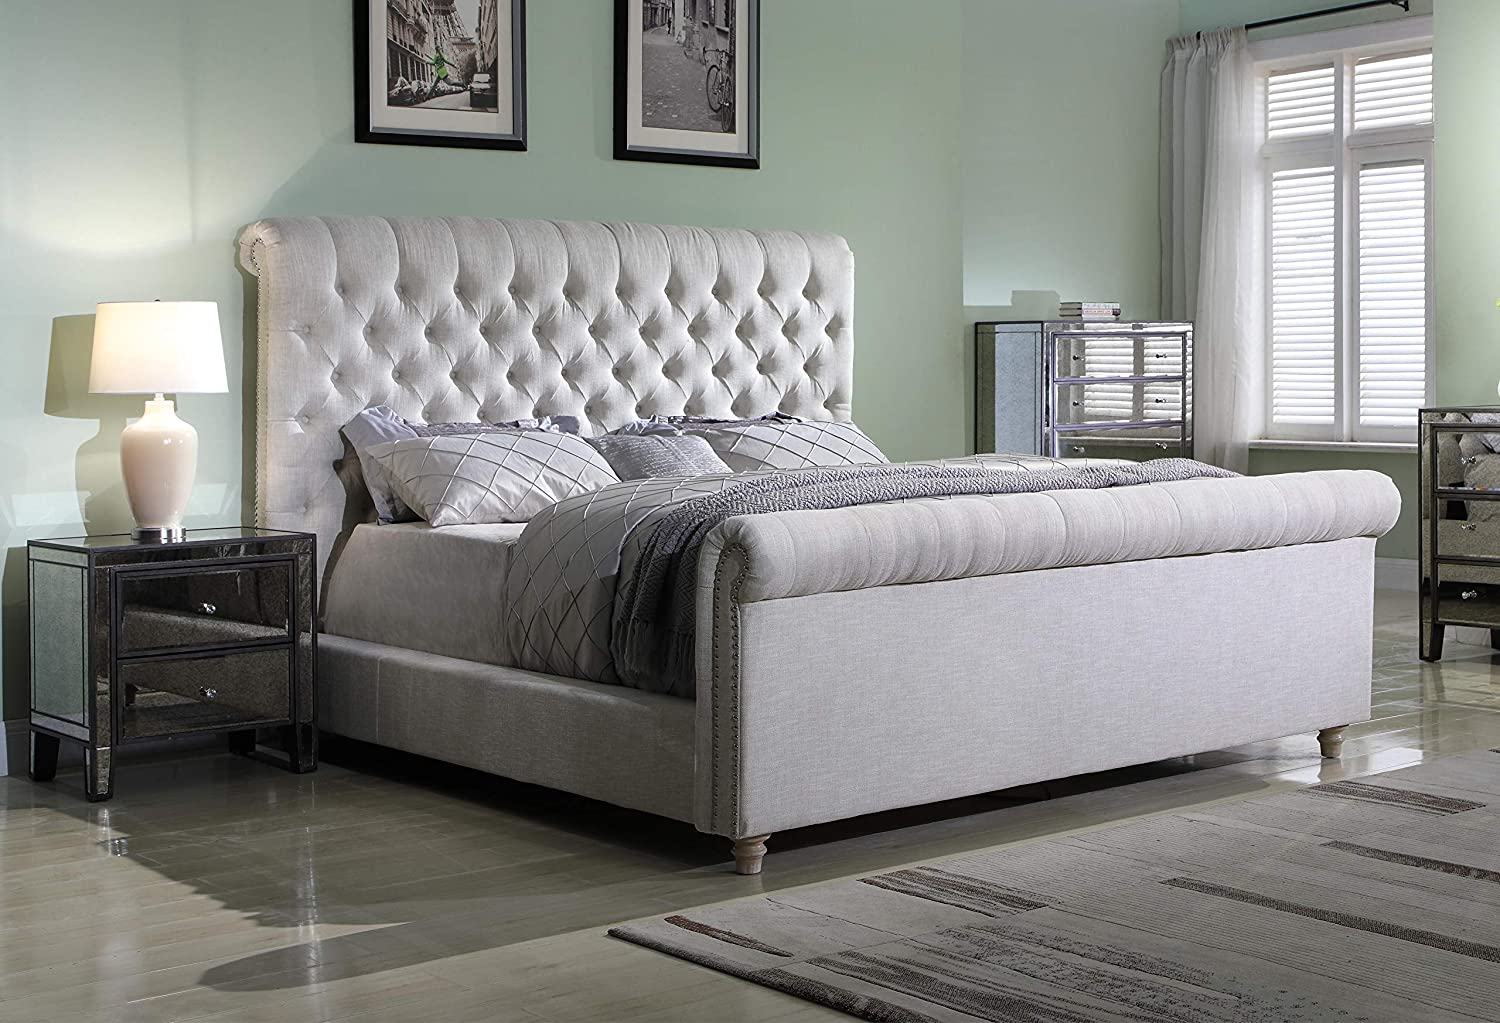 Fabric and upholstery details are common sleigh bed decorating ideas.